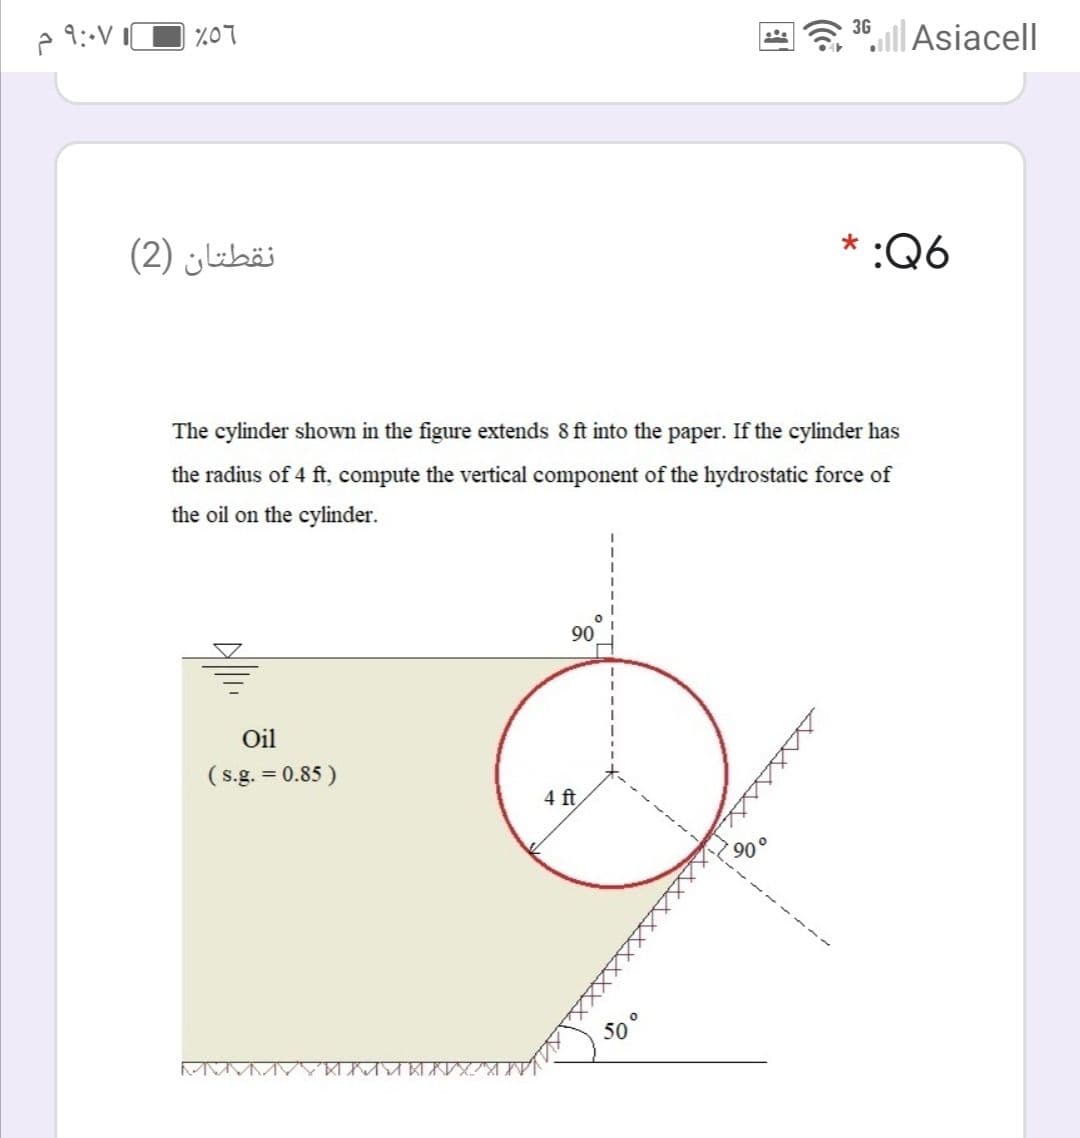 %07
3º,l|Asiacell
نقطتان )2(
* :Q6
The cylinder shown in the figure extends 8 ft into the paper. If the cylinder has
the radius of 4 ft, compute the vertical component of the hydrostatic force of
the oil on the cylinder.
90
Oil
(s.g. = 0.85 )
4 ft
50°
